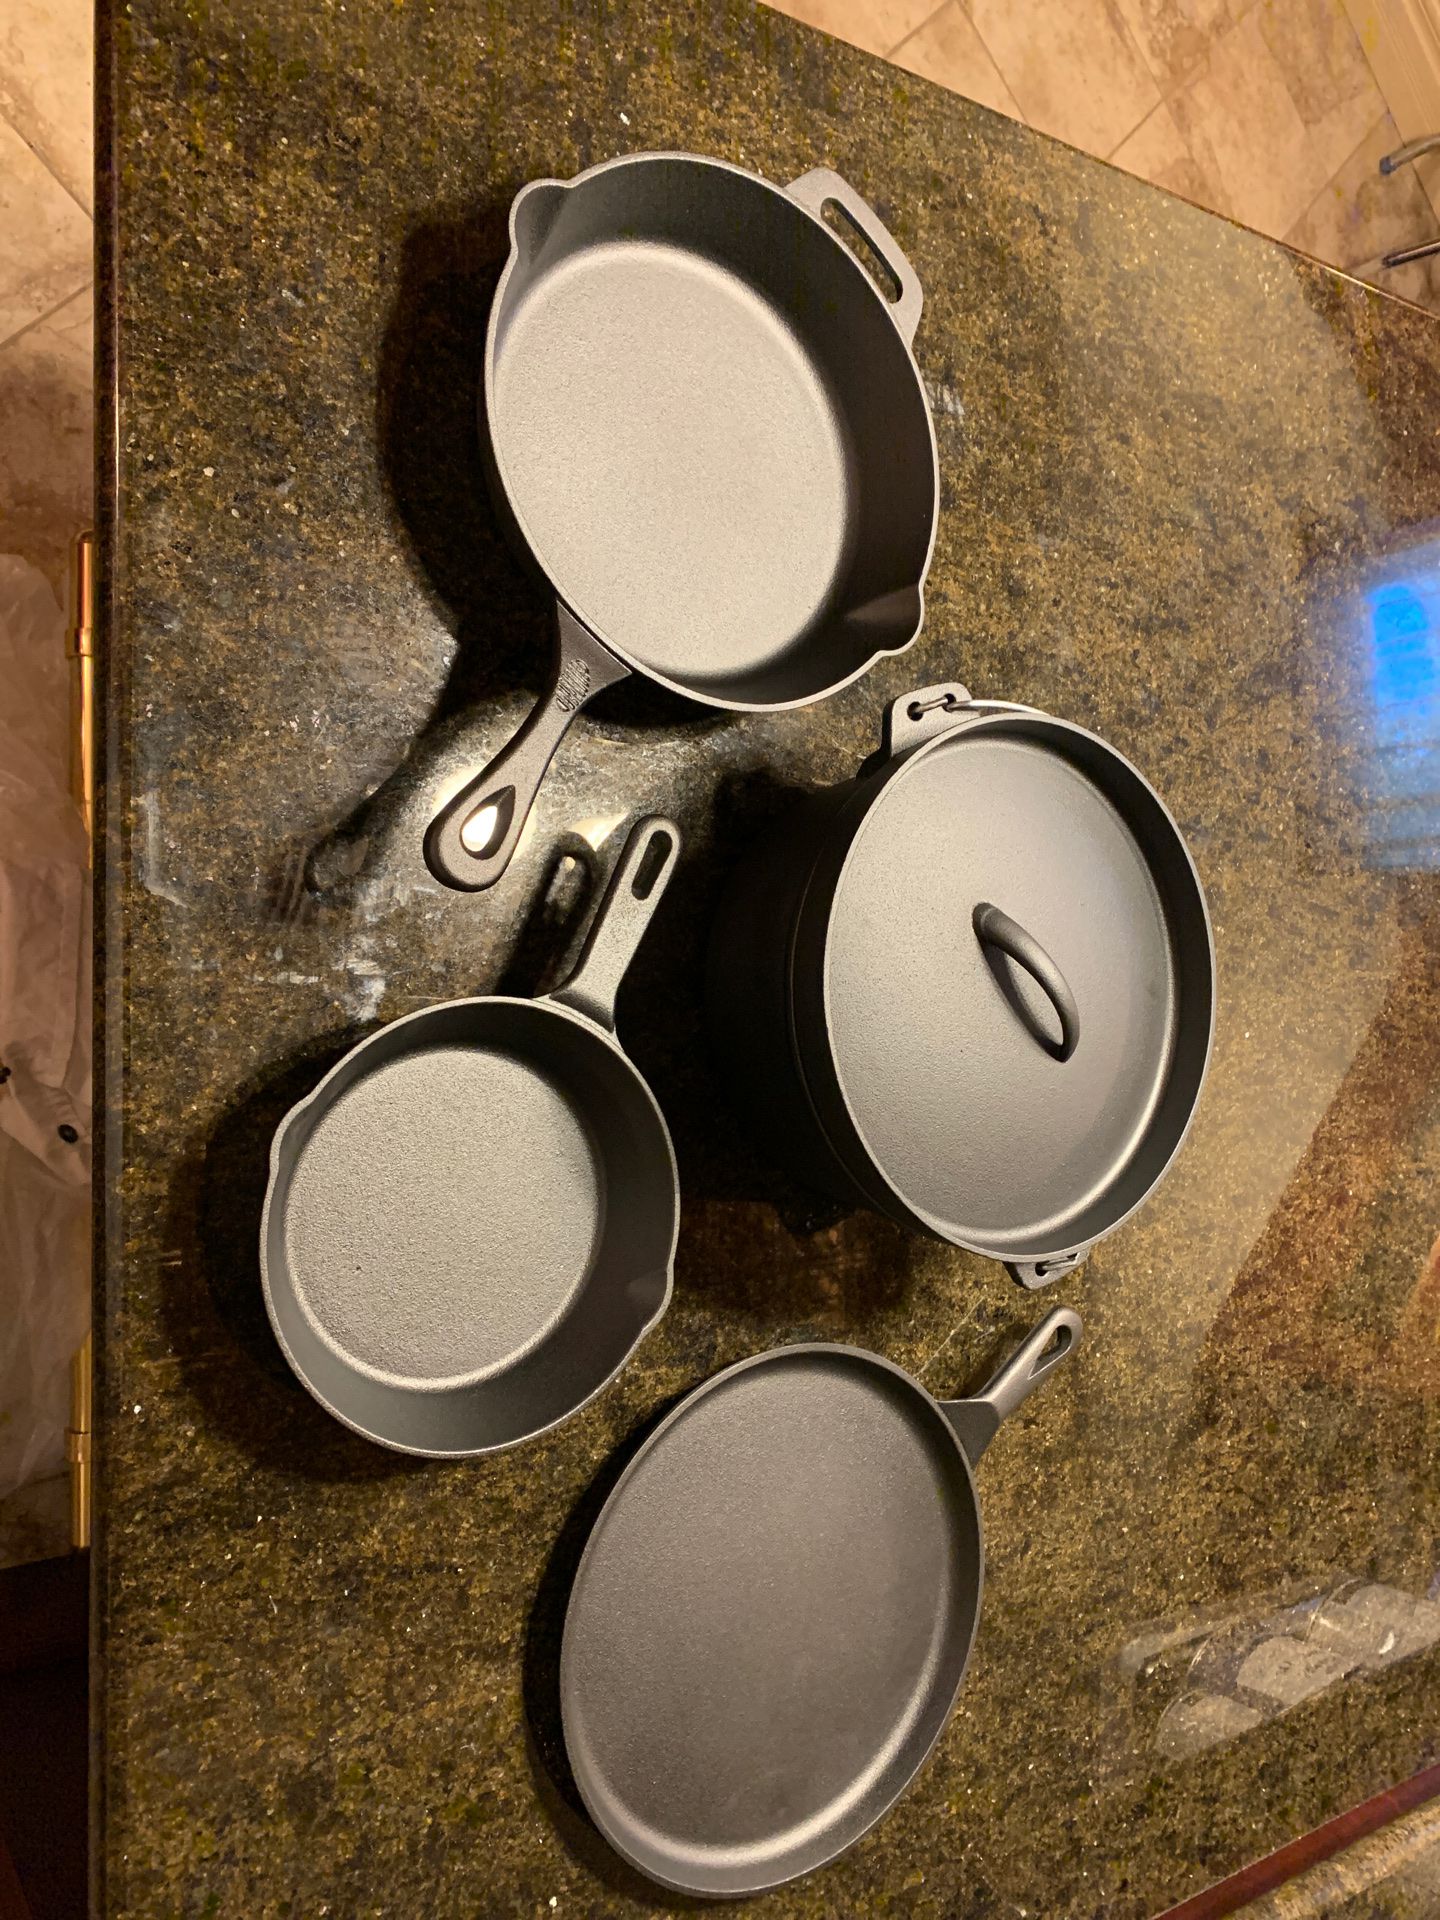 New Amazon cast iron set of pans and covered pot